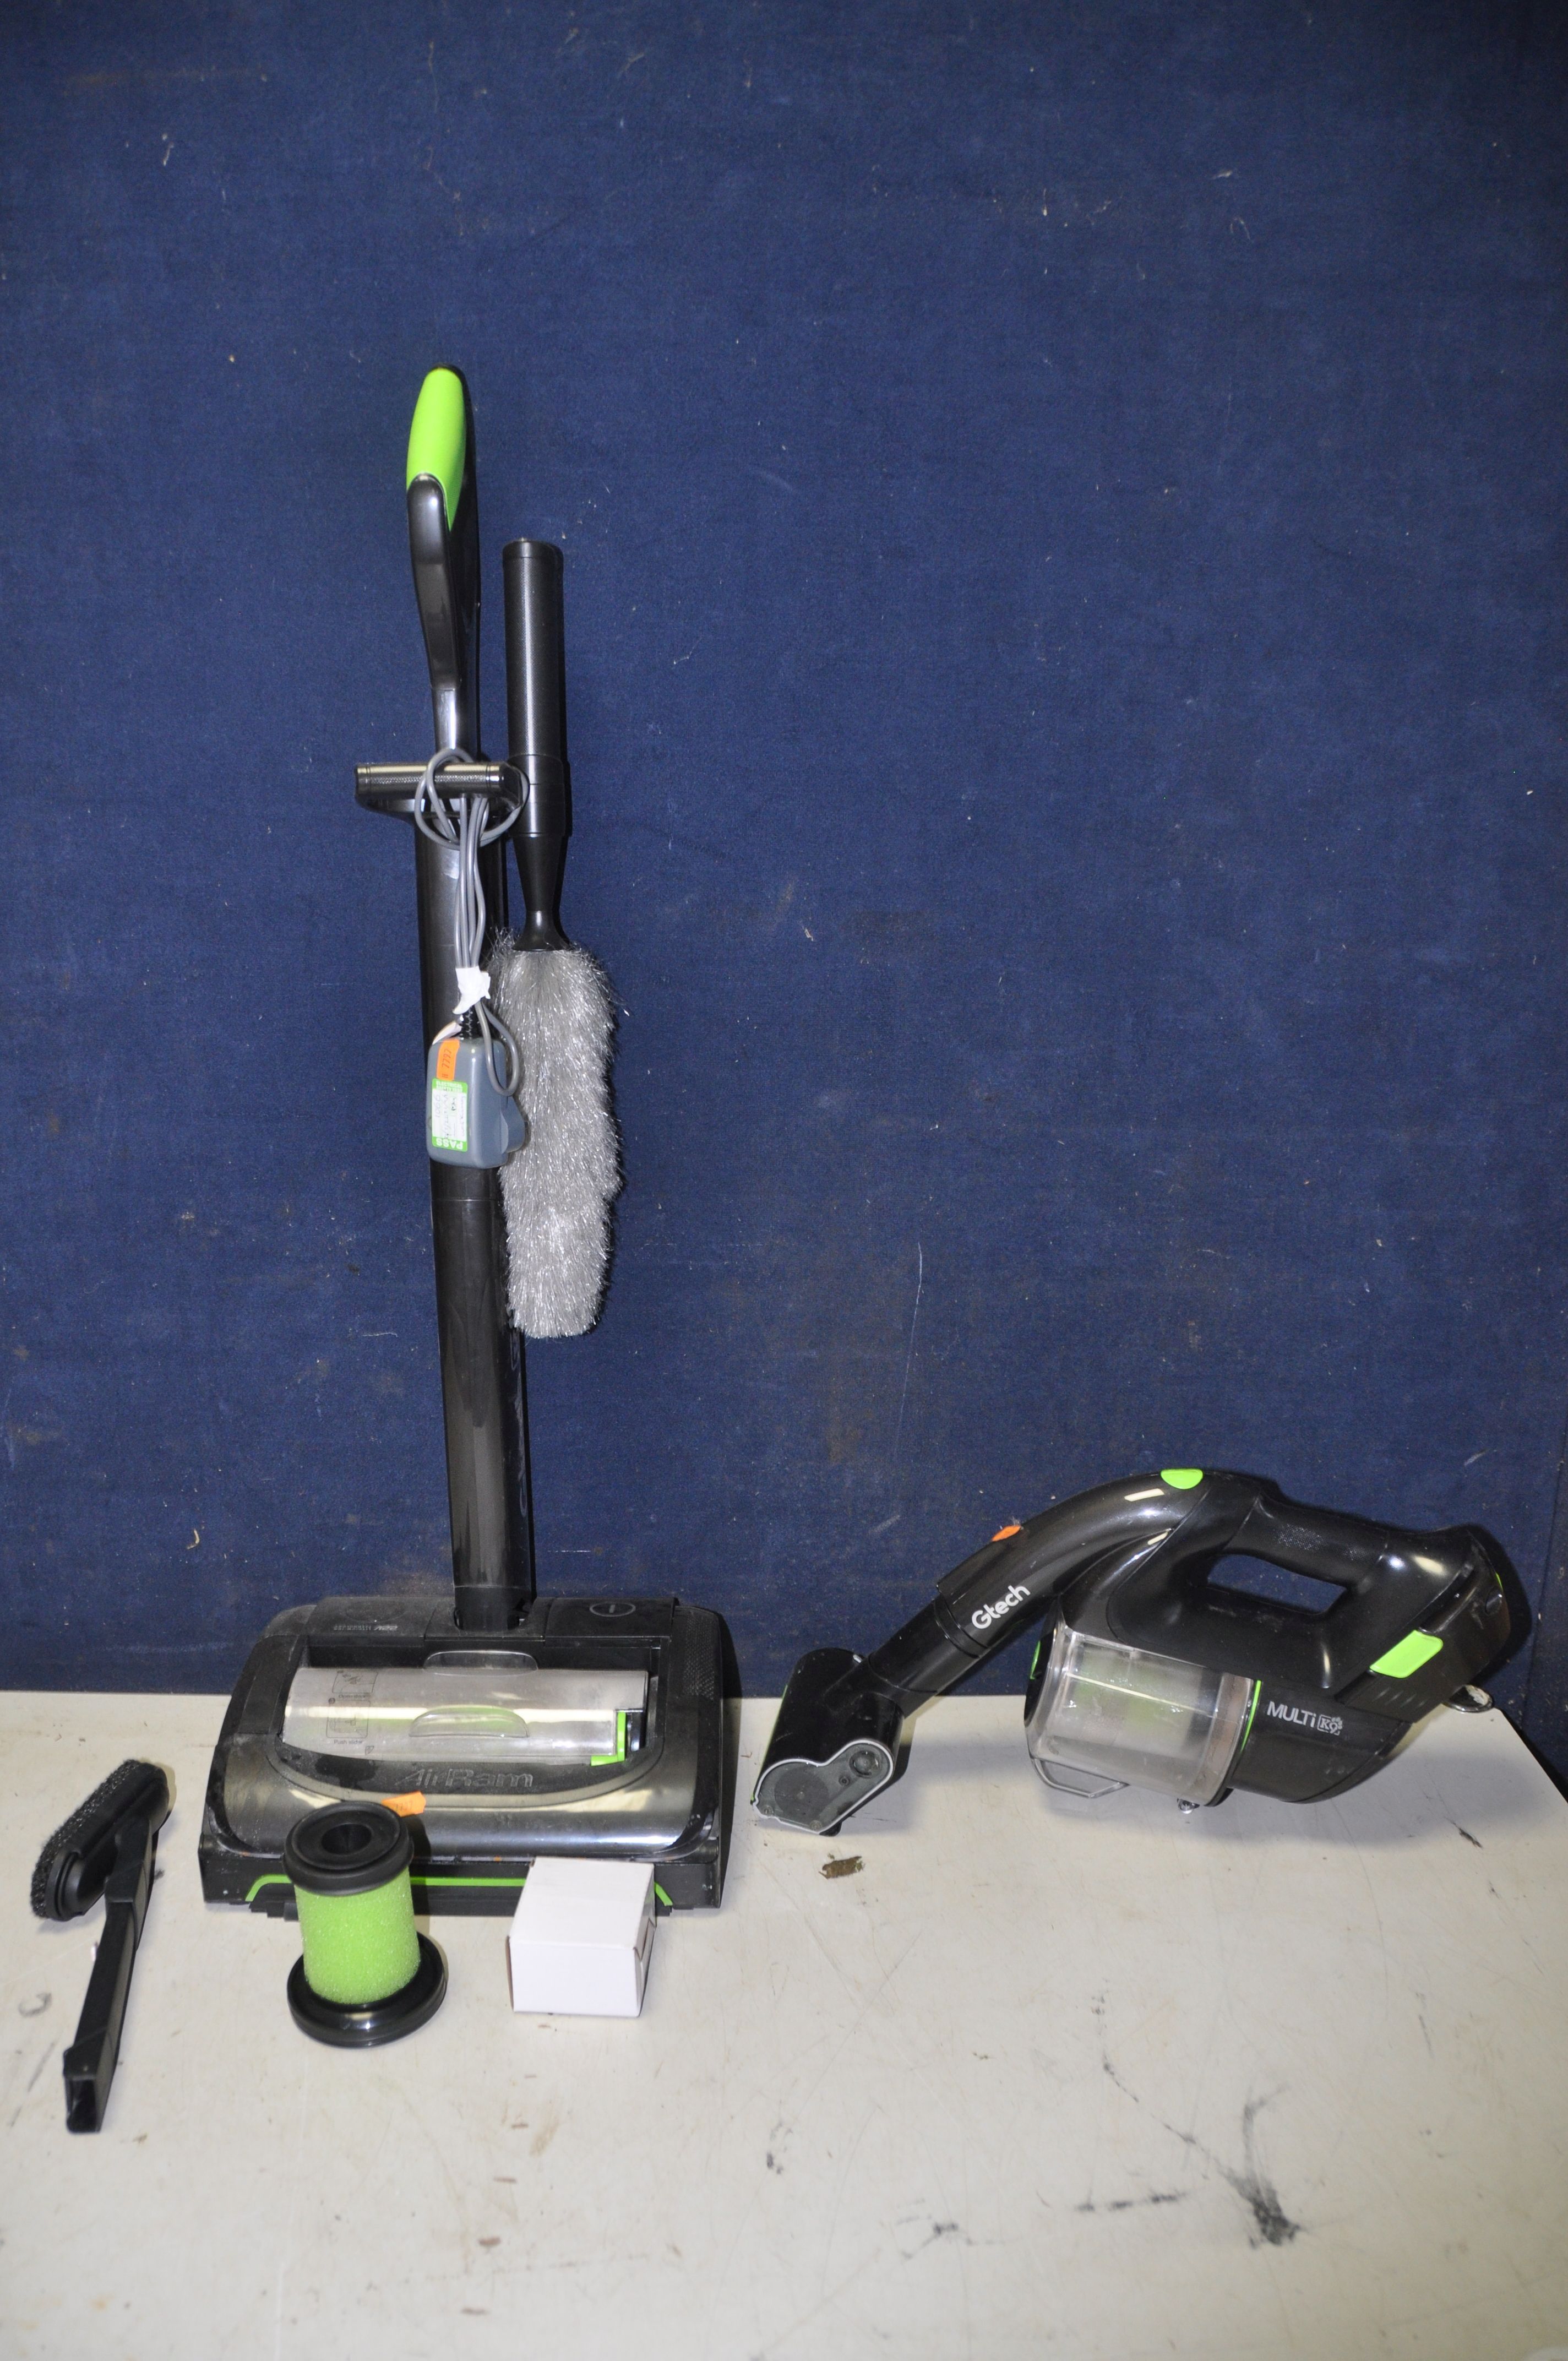 A G-TECH AIR RAM K9 VACUUM with charger, along with a G-tech multi K9 with spare filter and air